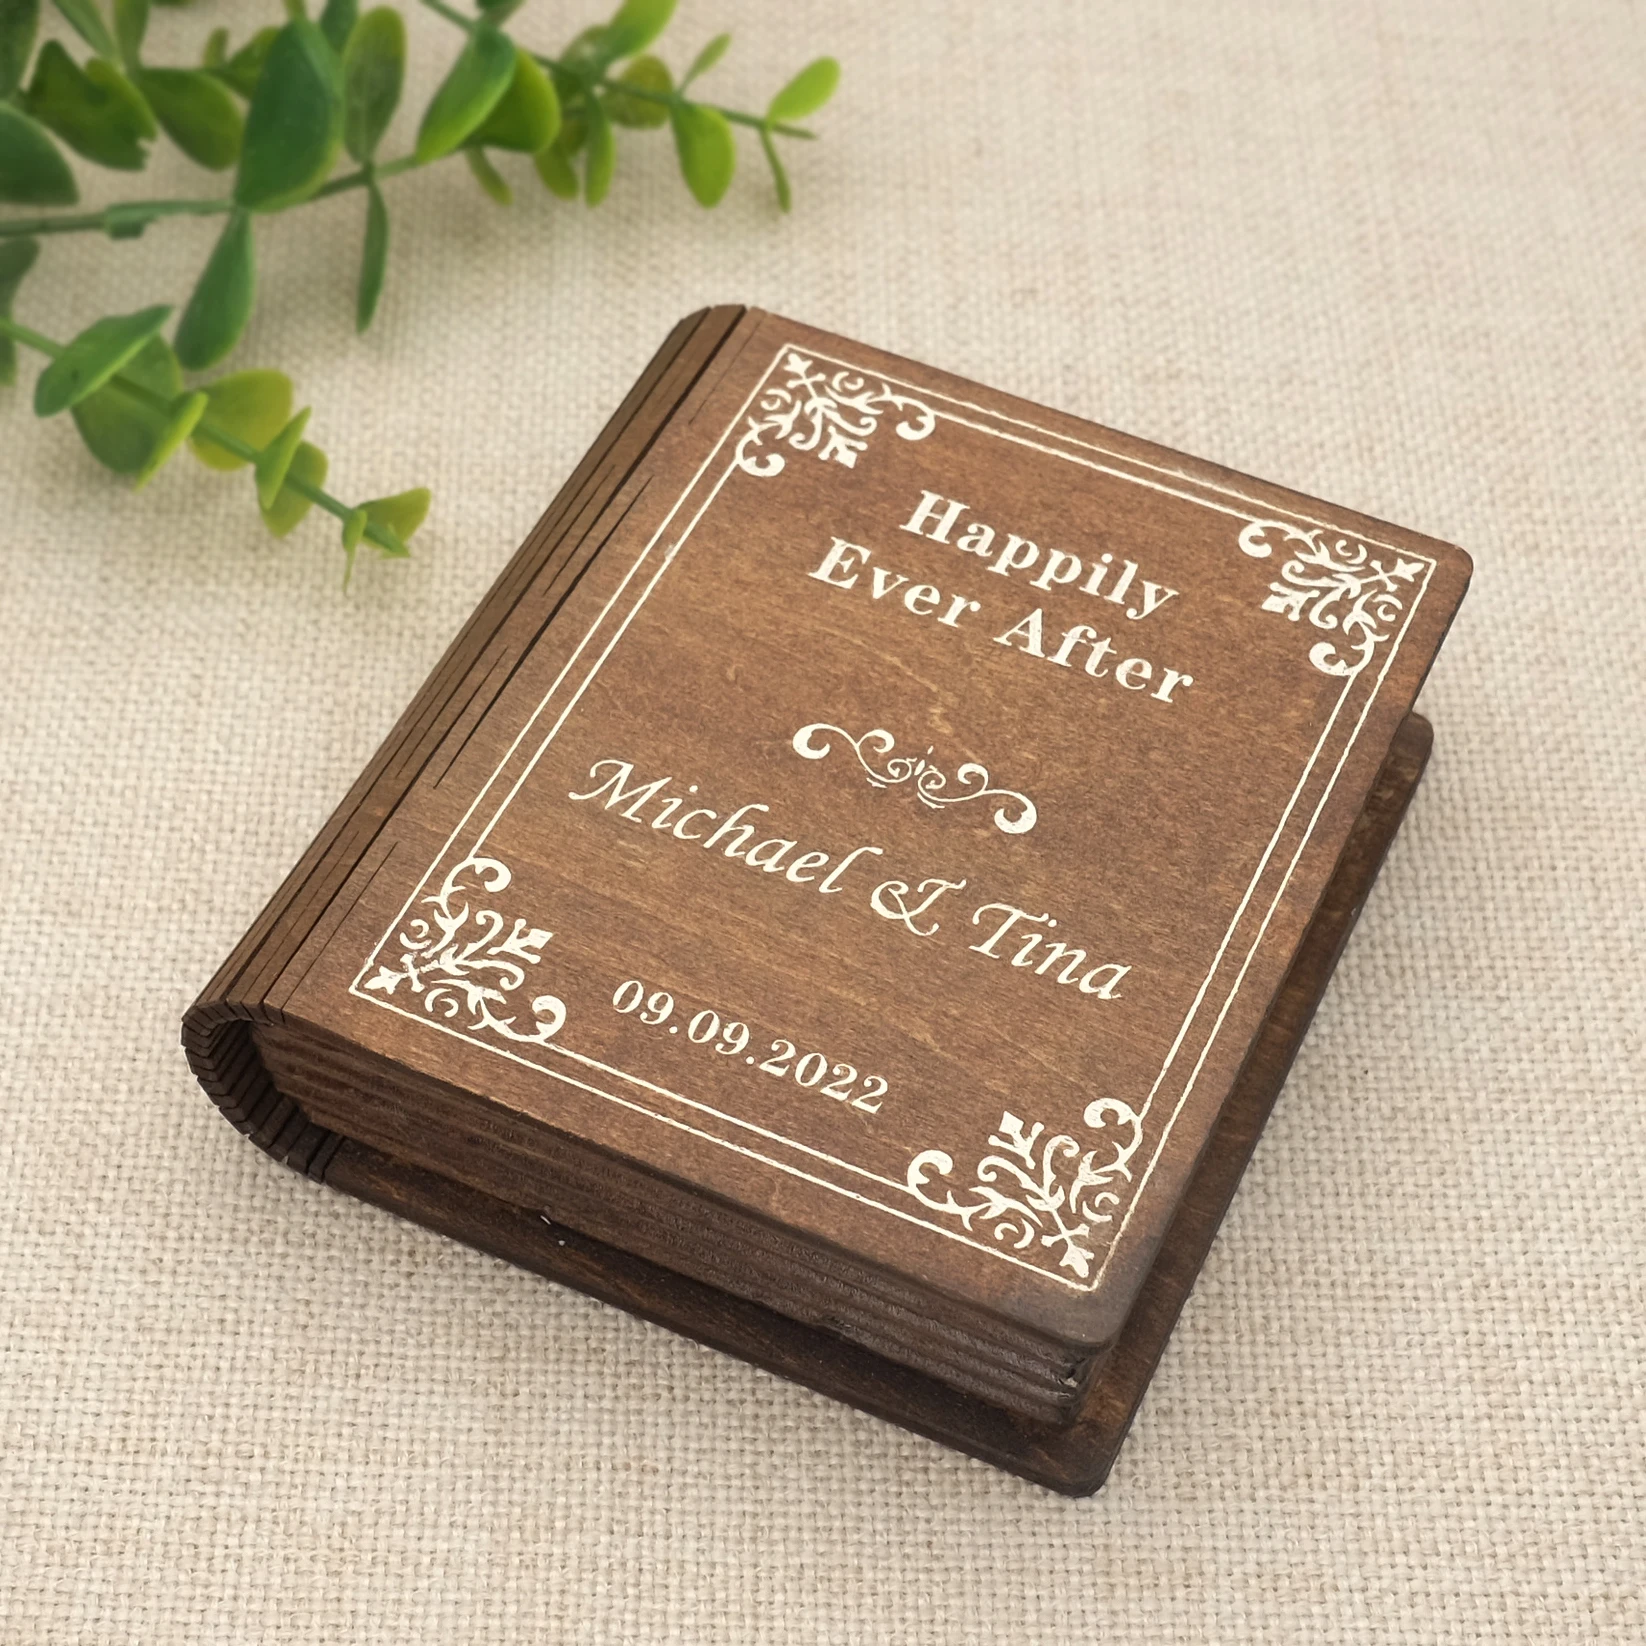 Personalized Wedding Rings Box Custom Wedding Rings Bearer Pillow Rustic Wooden Book Box Engagement Ring Holder Wedding Decor cheap white lace wedding decoration ring pillow coussin alliance bridal ring bearer pillow cushions wedding marriage ceremony